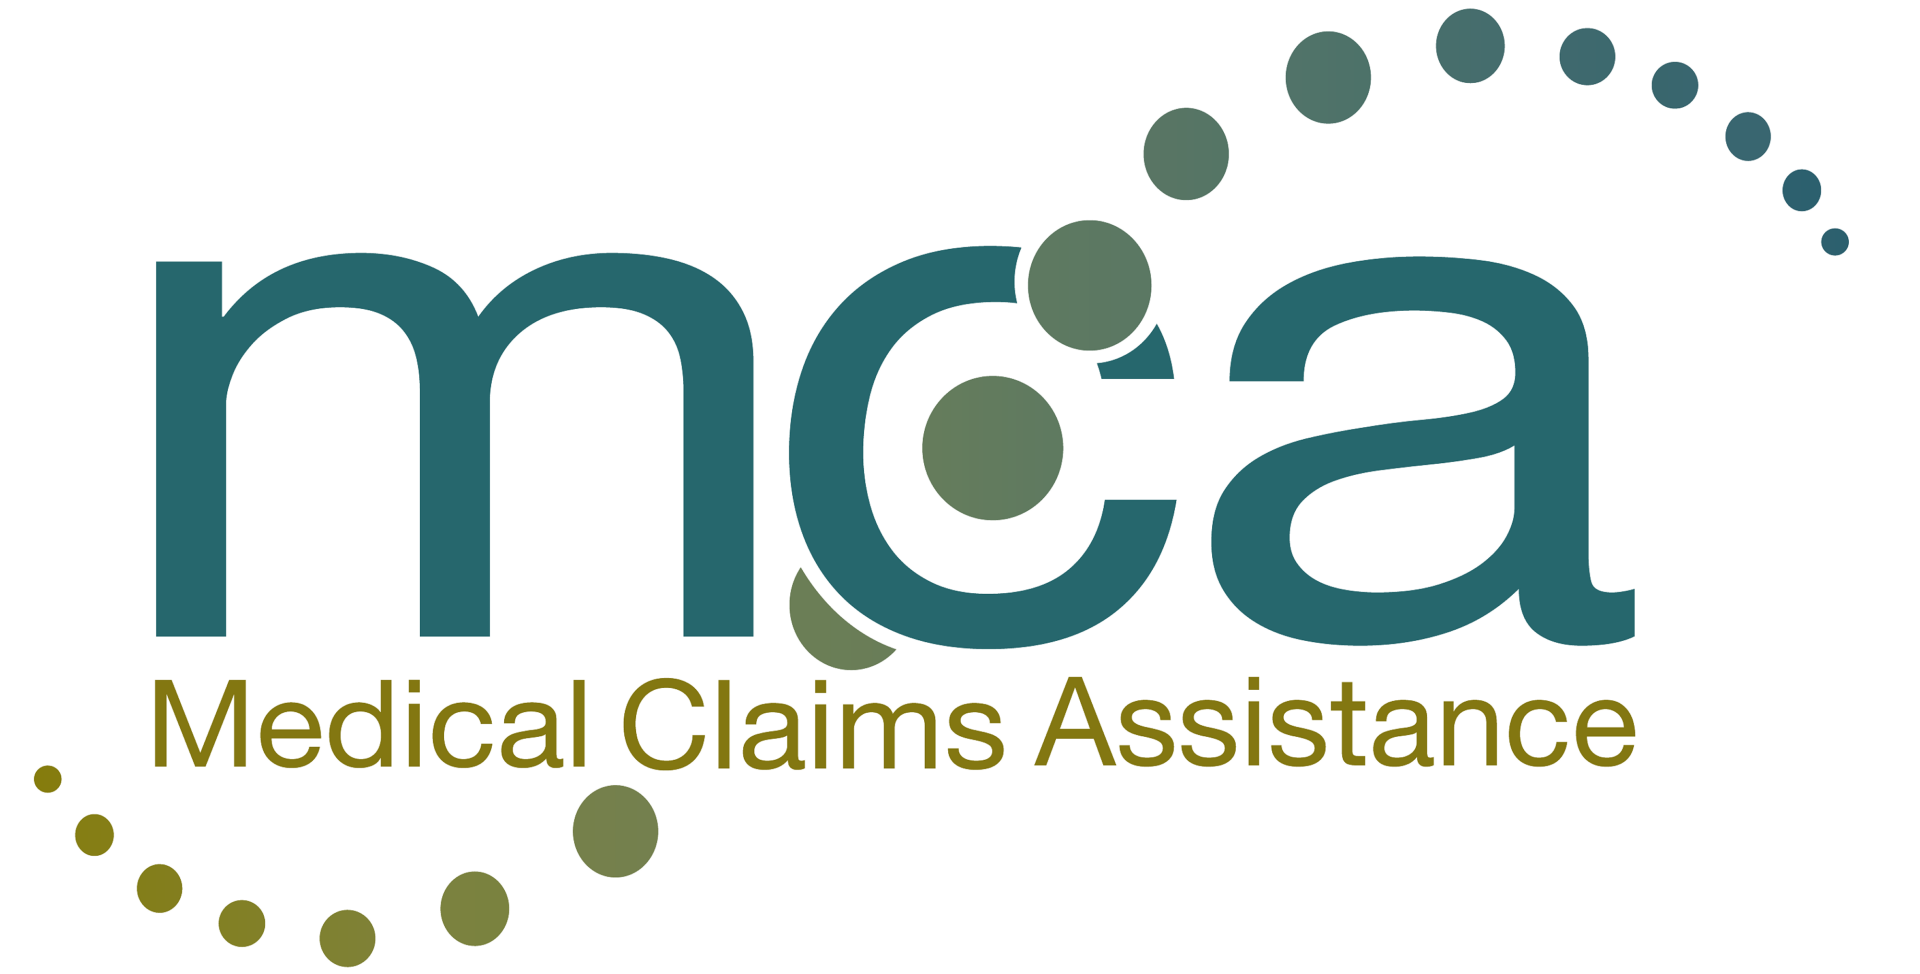 Medical Claims Assistance